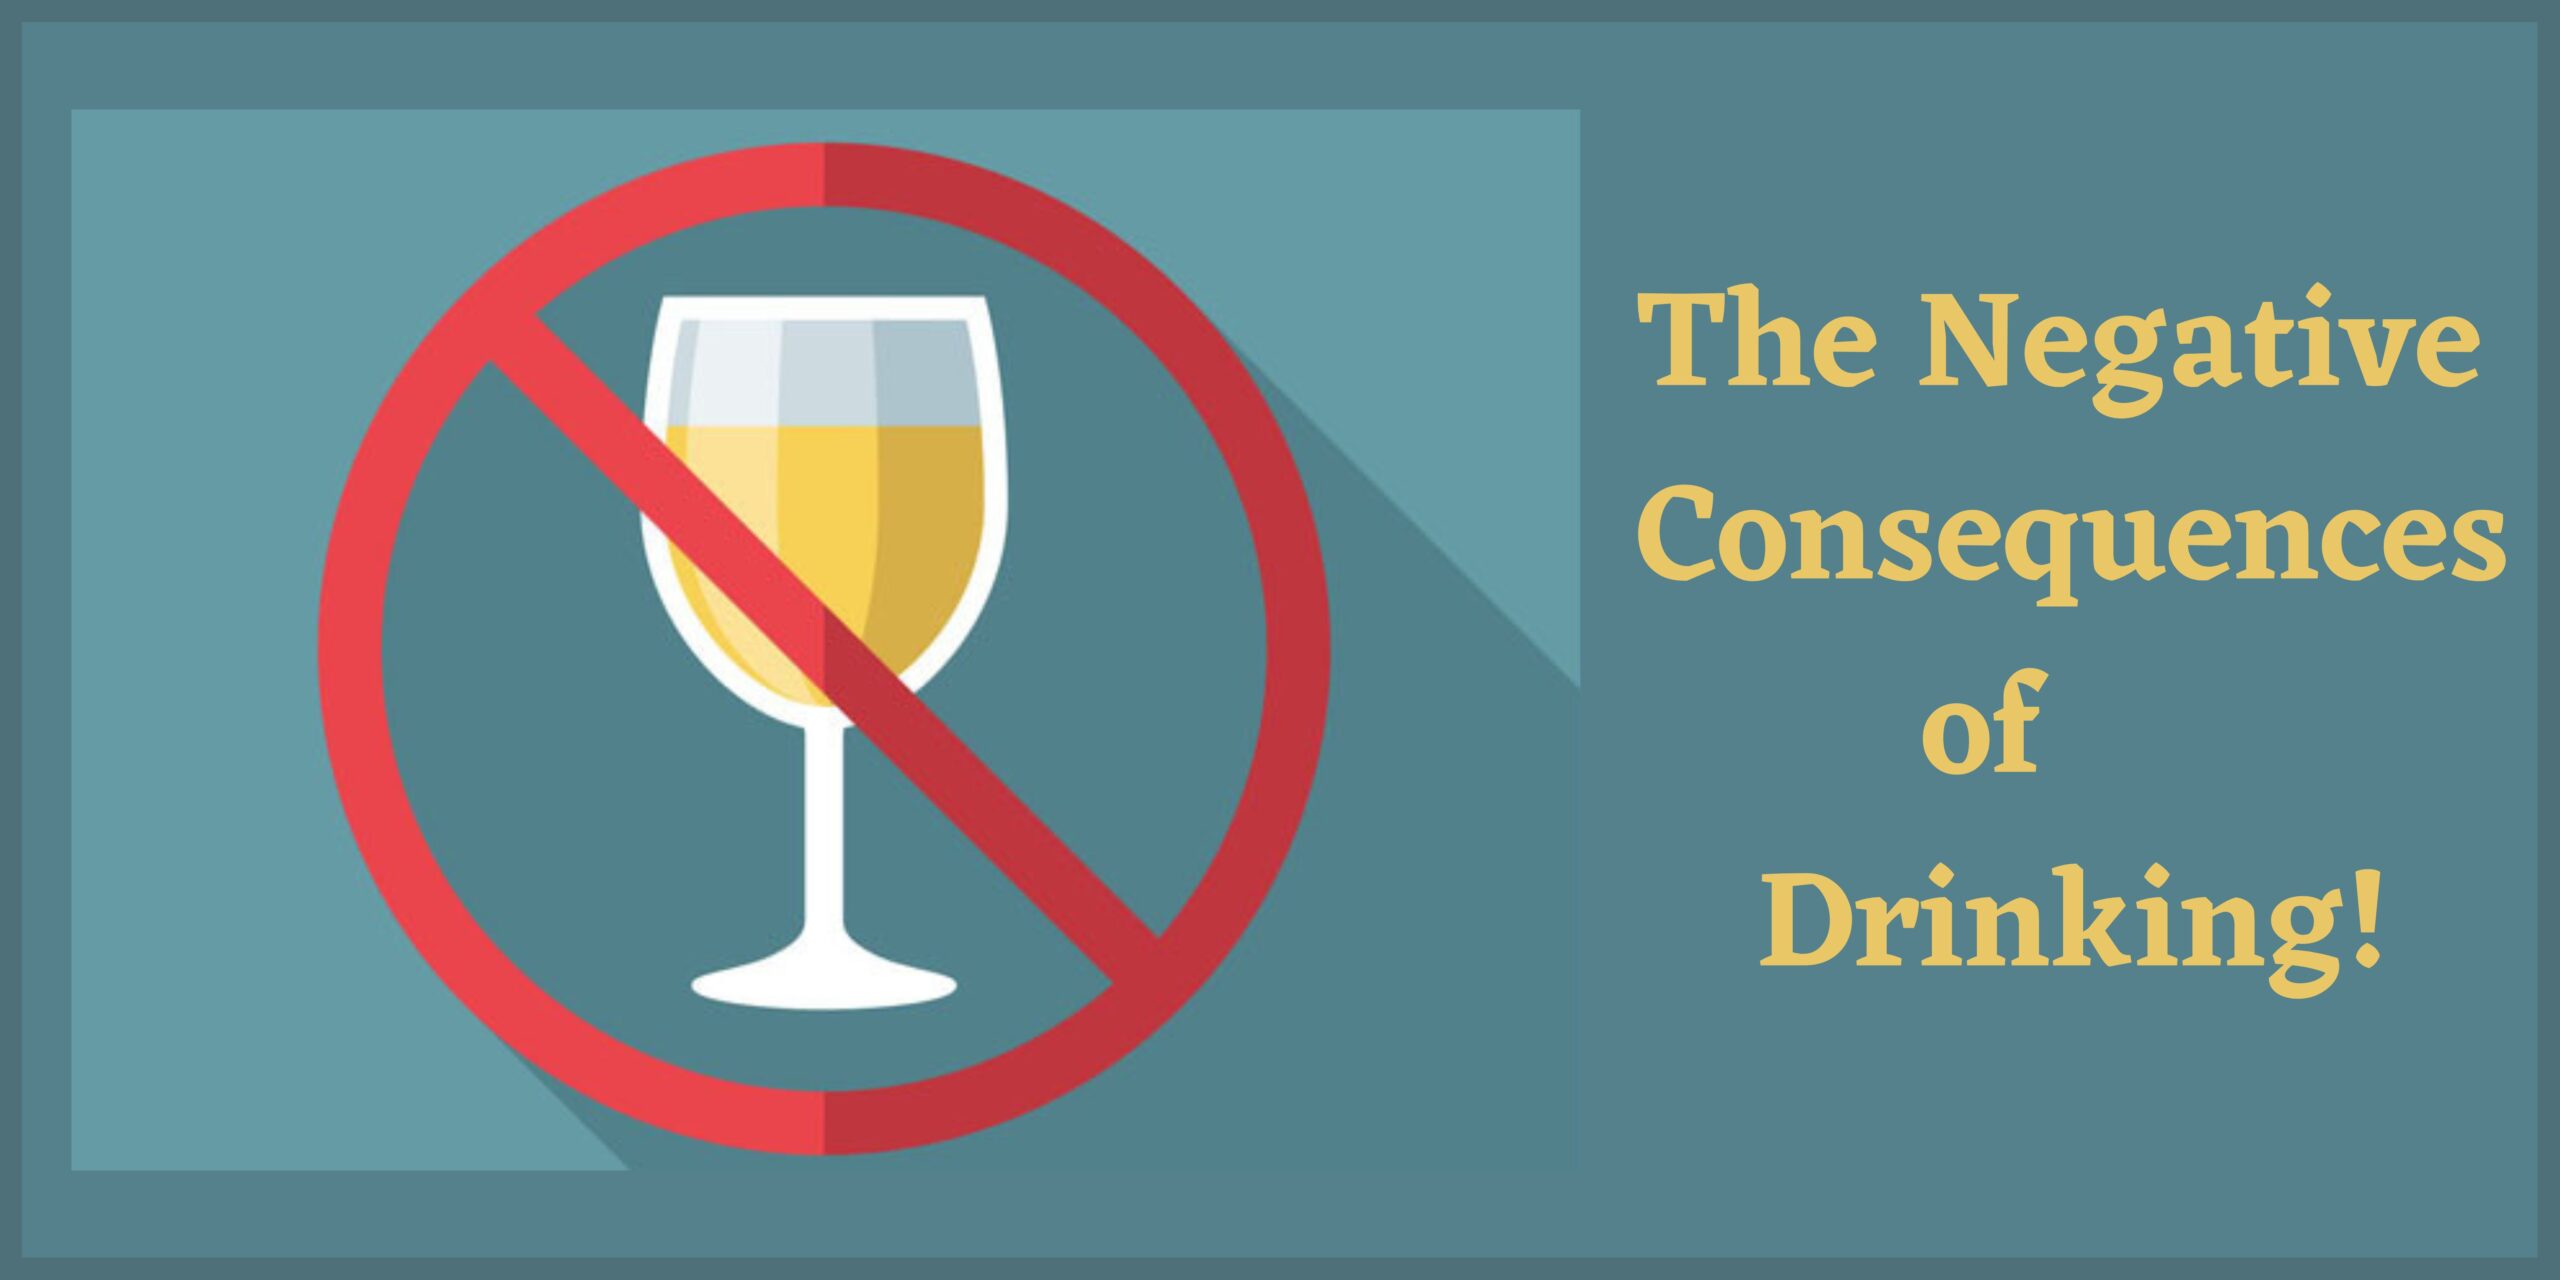 Negative consequences of Drinking!